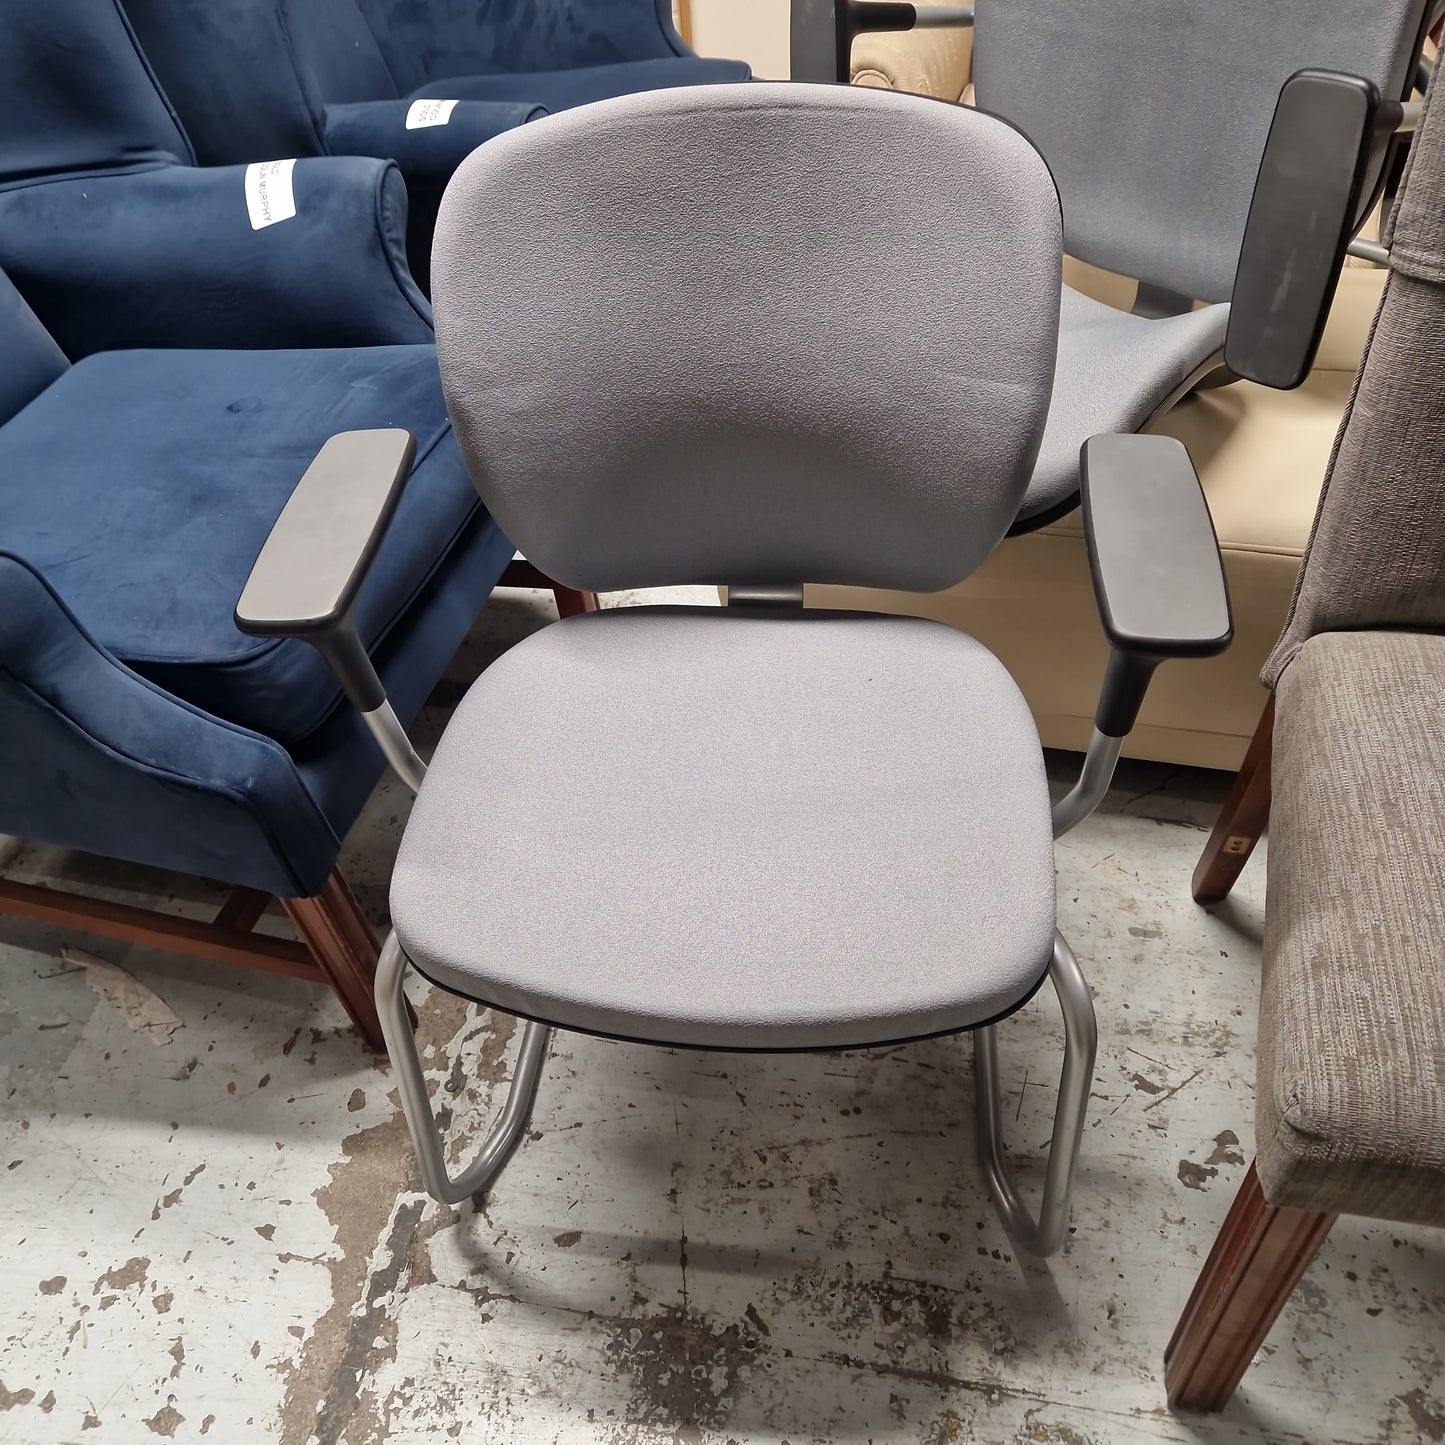 Orangebox Joy skid based meeting chairs grey fabric seat and back cw arms